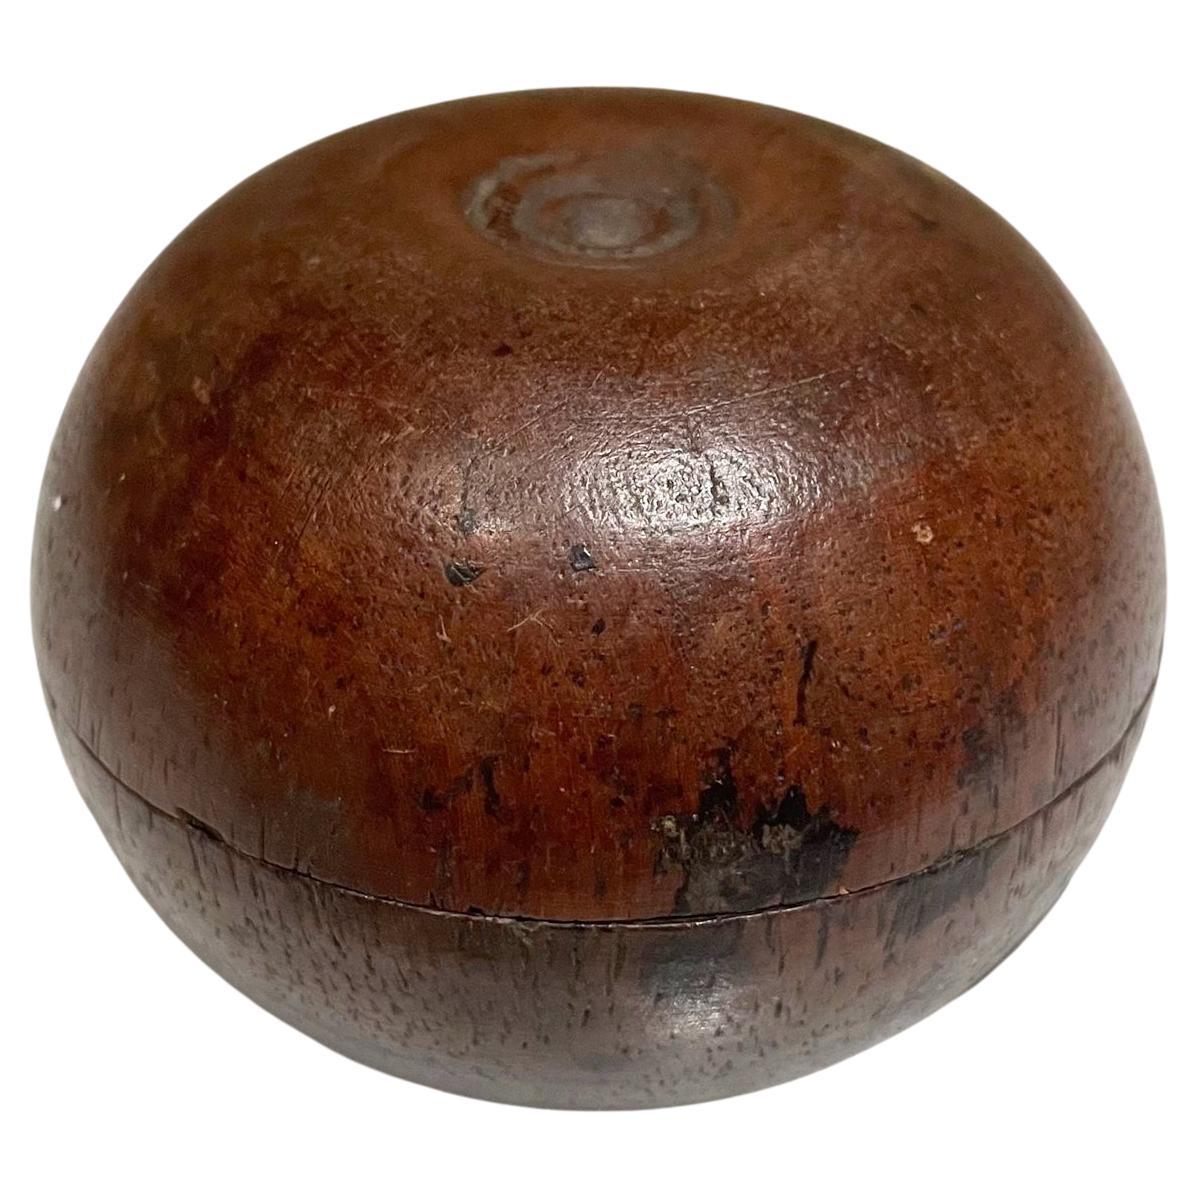 Tiny Box
Round Wood Secret Stash Box
Unmarked
Midcentury Keepsake Trinket Box with Lid
2.5 diameter x 1.75 tall inches
Preowned unrestored vintage condition.
See images.


